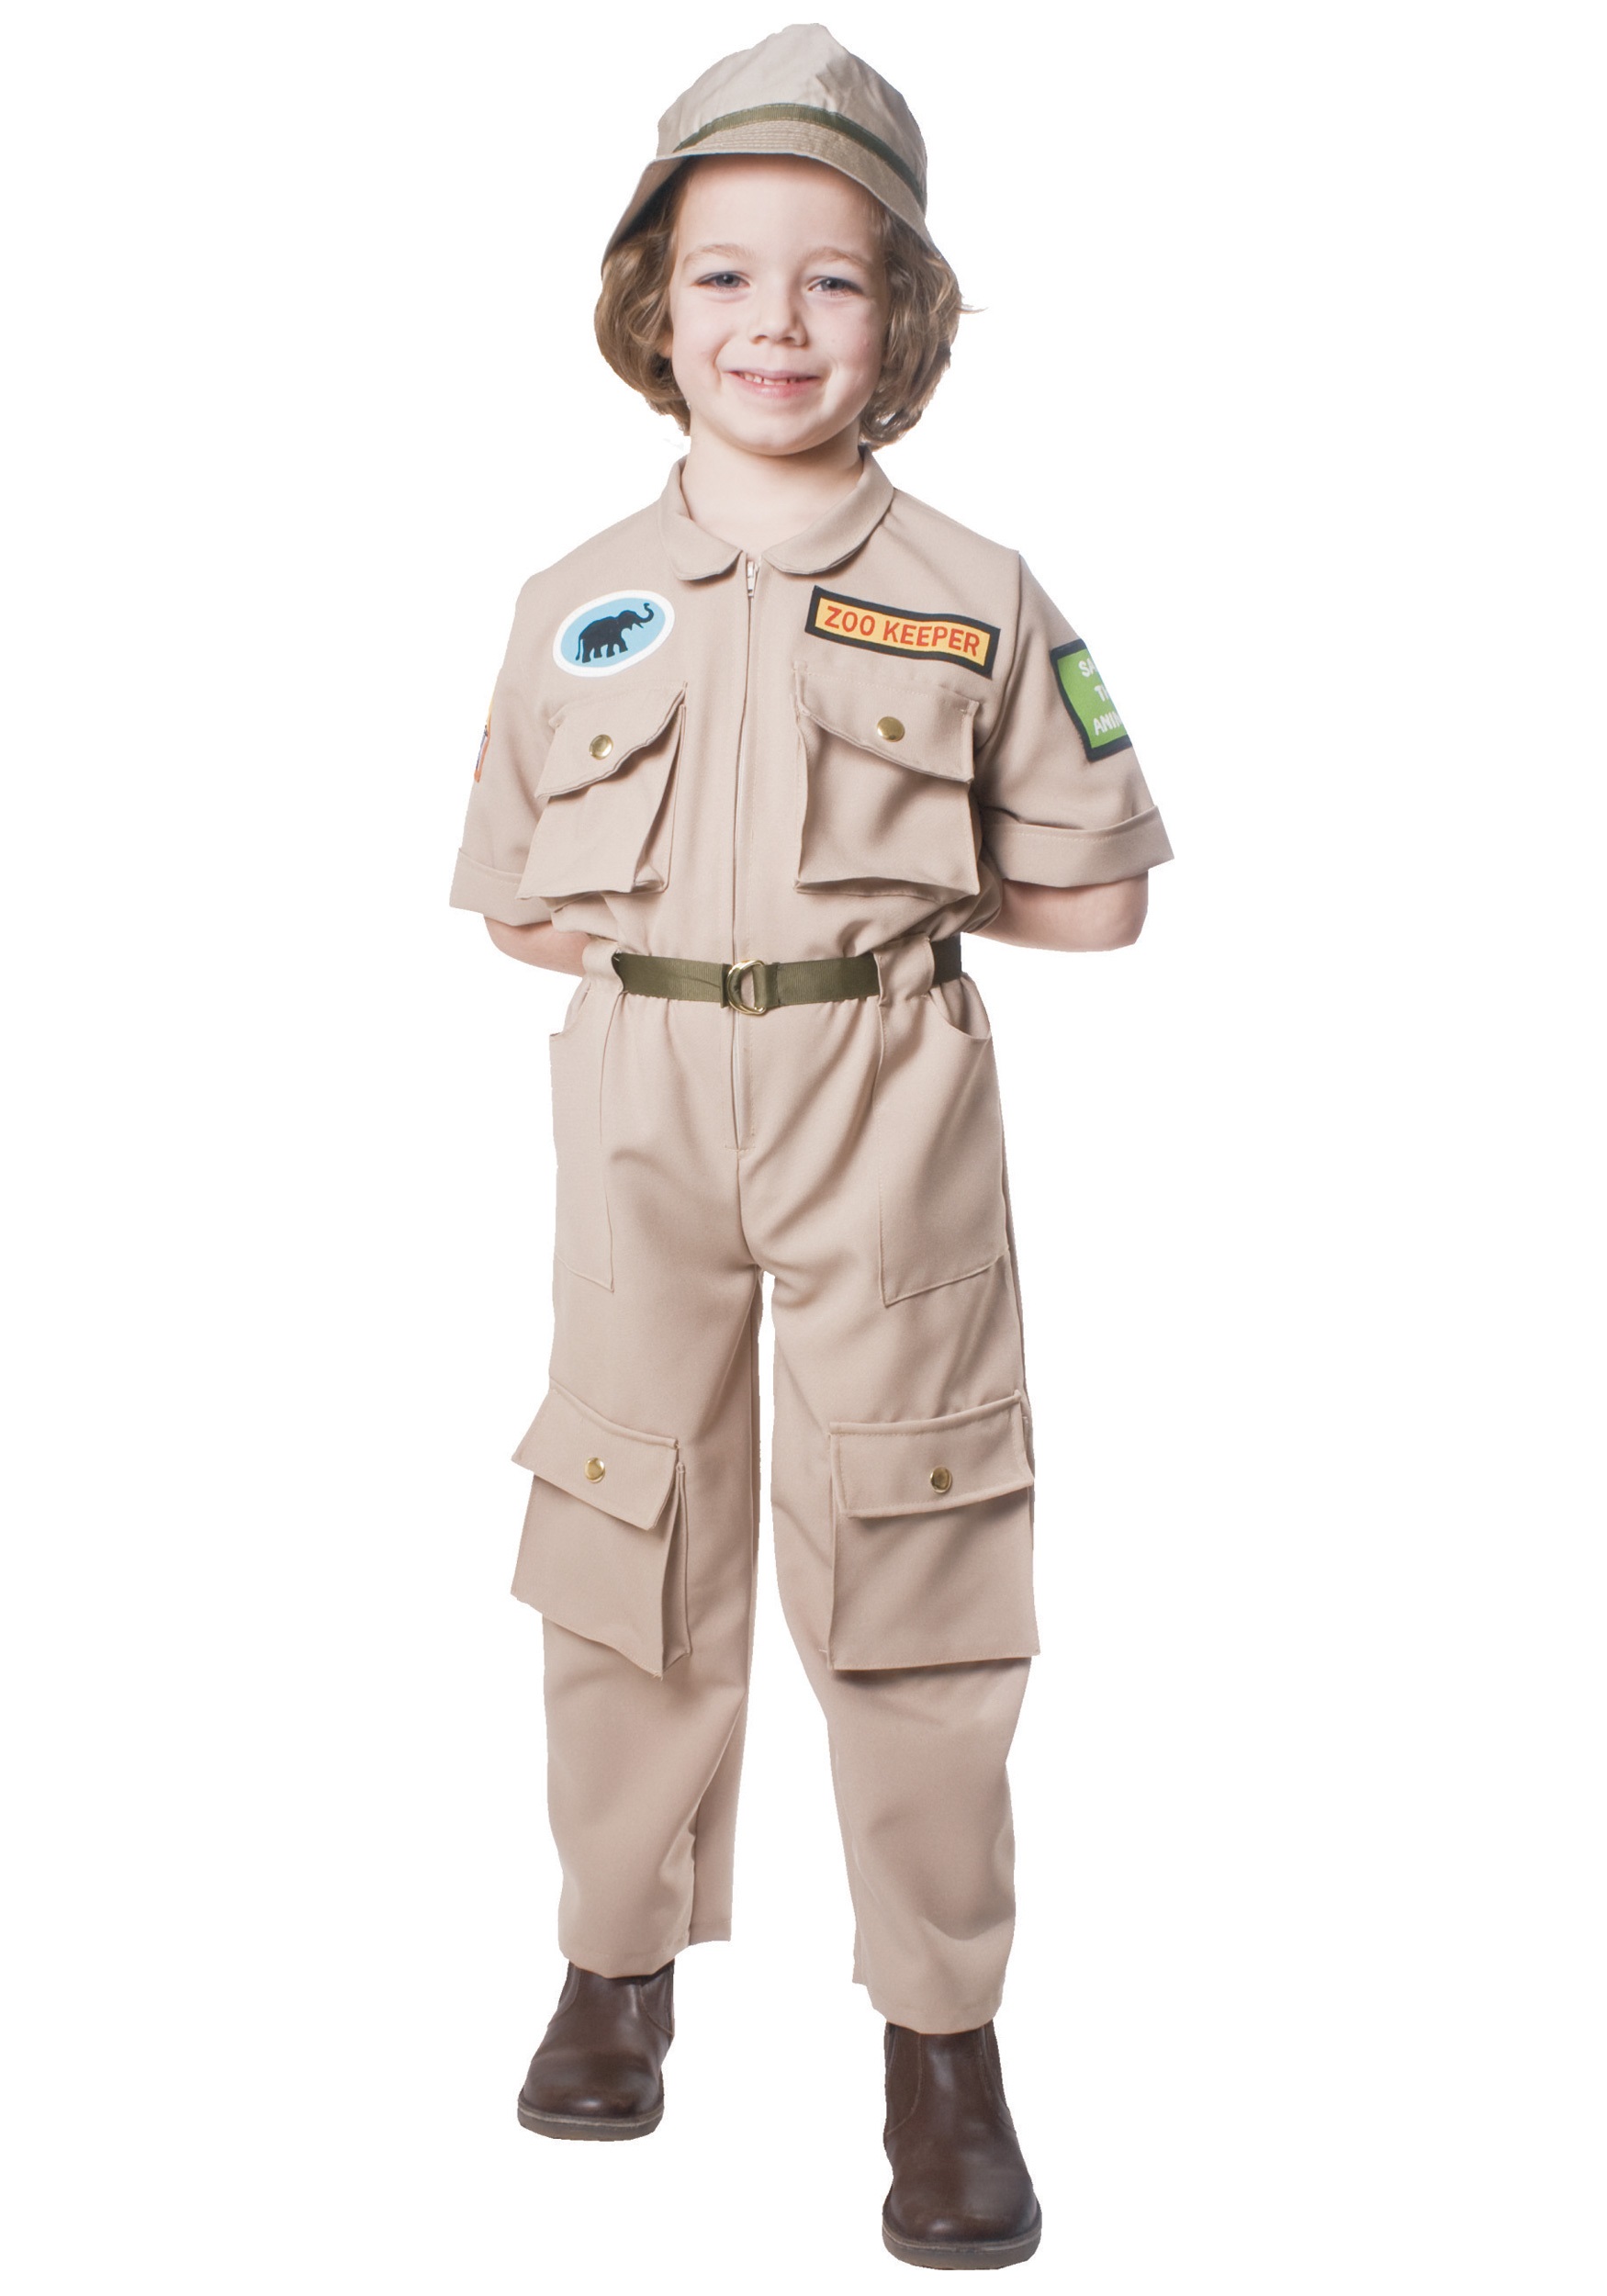 Zoo Keeper Costume For Child